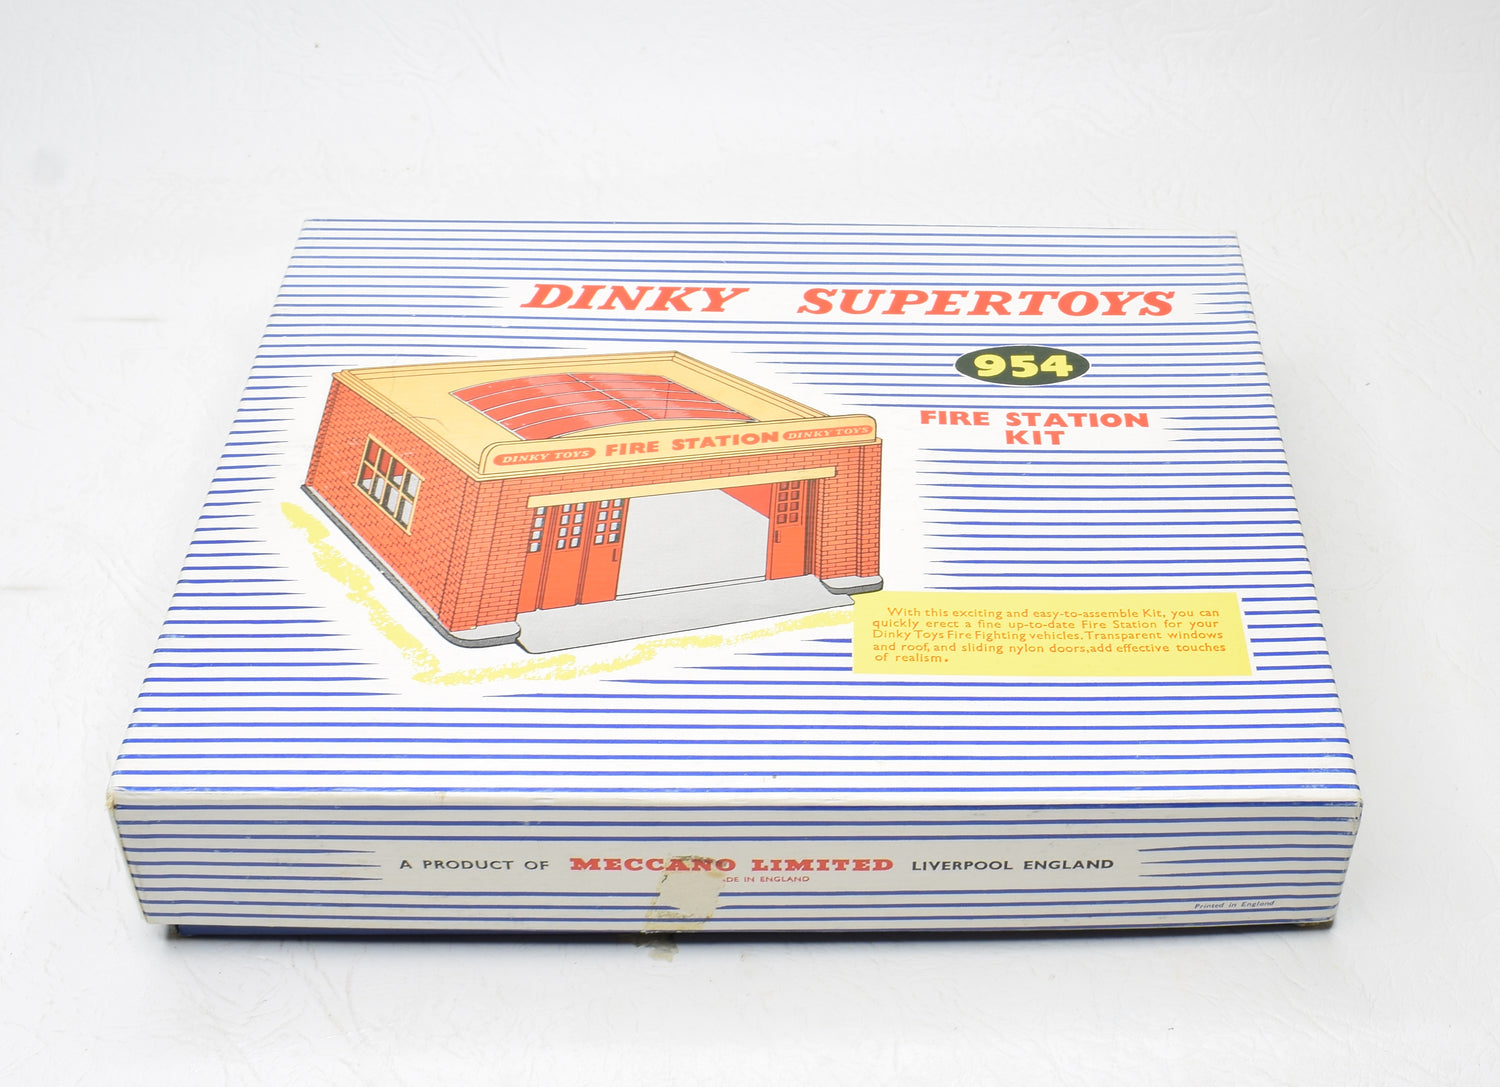 Dinky toys 954 Fire Station kit Virtually Mint/Boxed 'Wickham' Collection